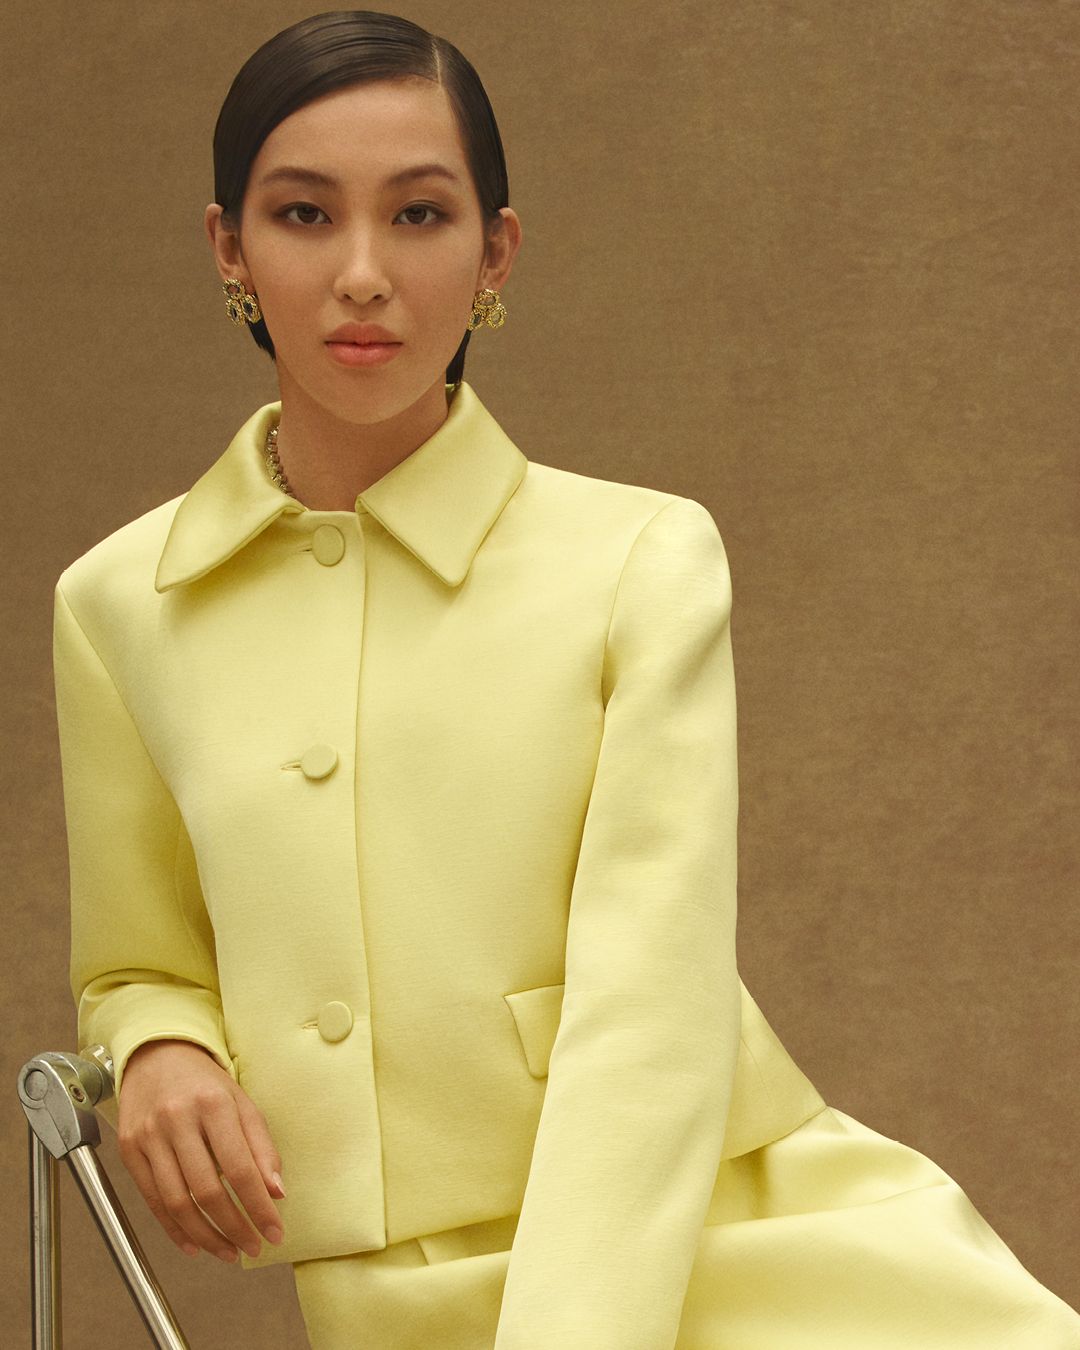 Model sitting on chair wearing a yellow collared jacket and skirt